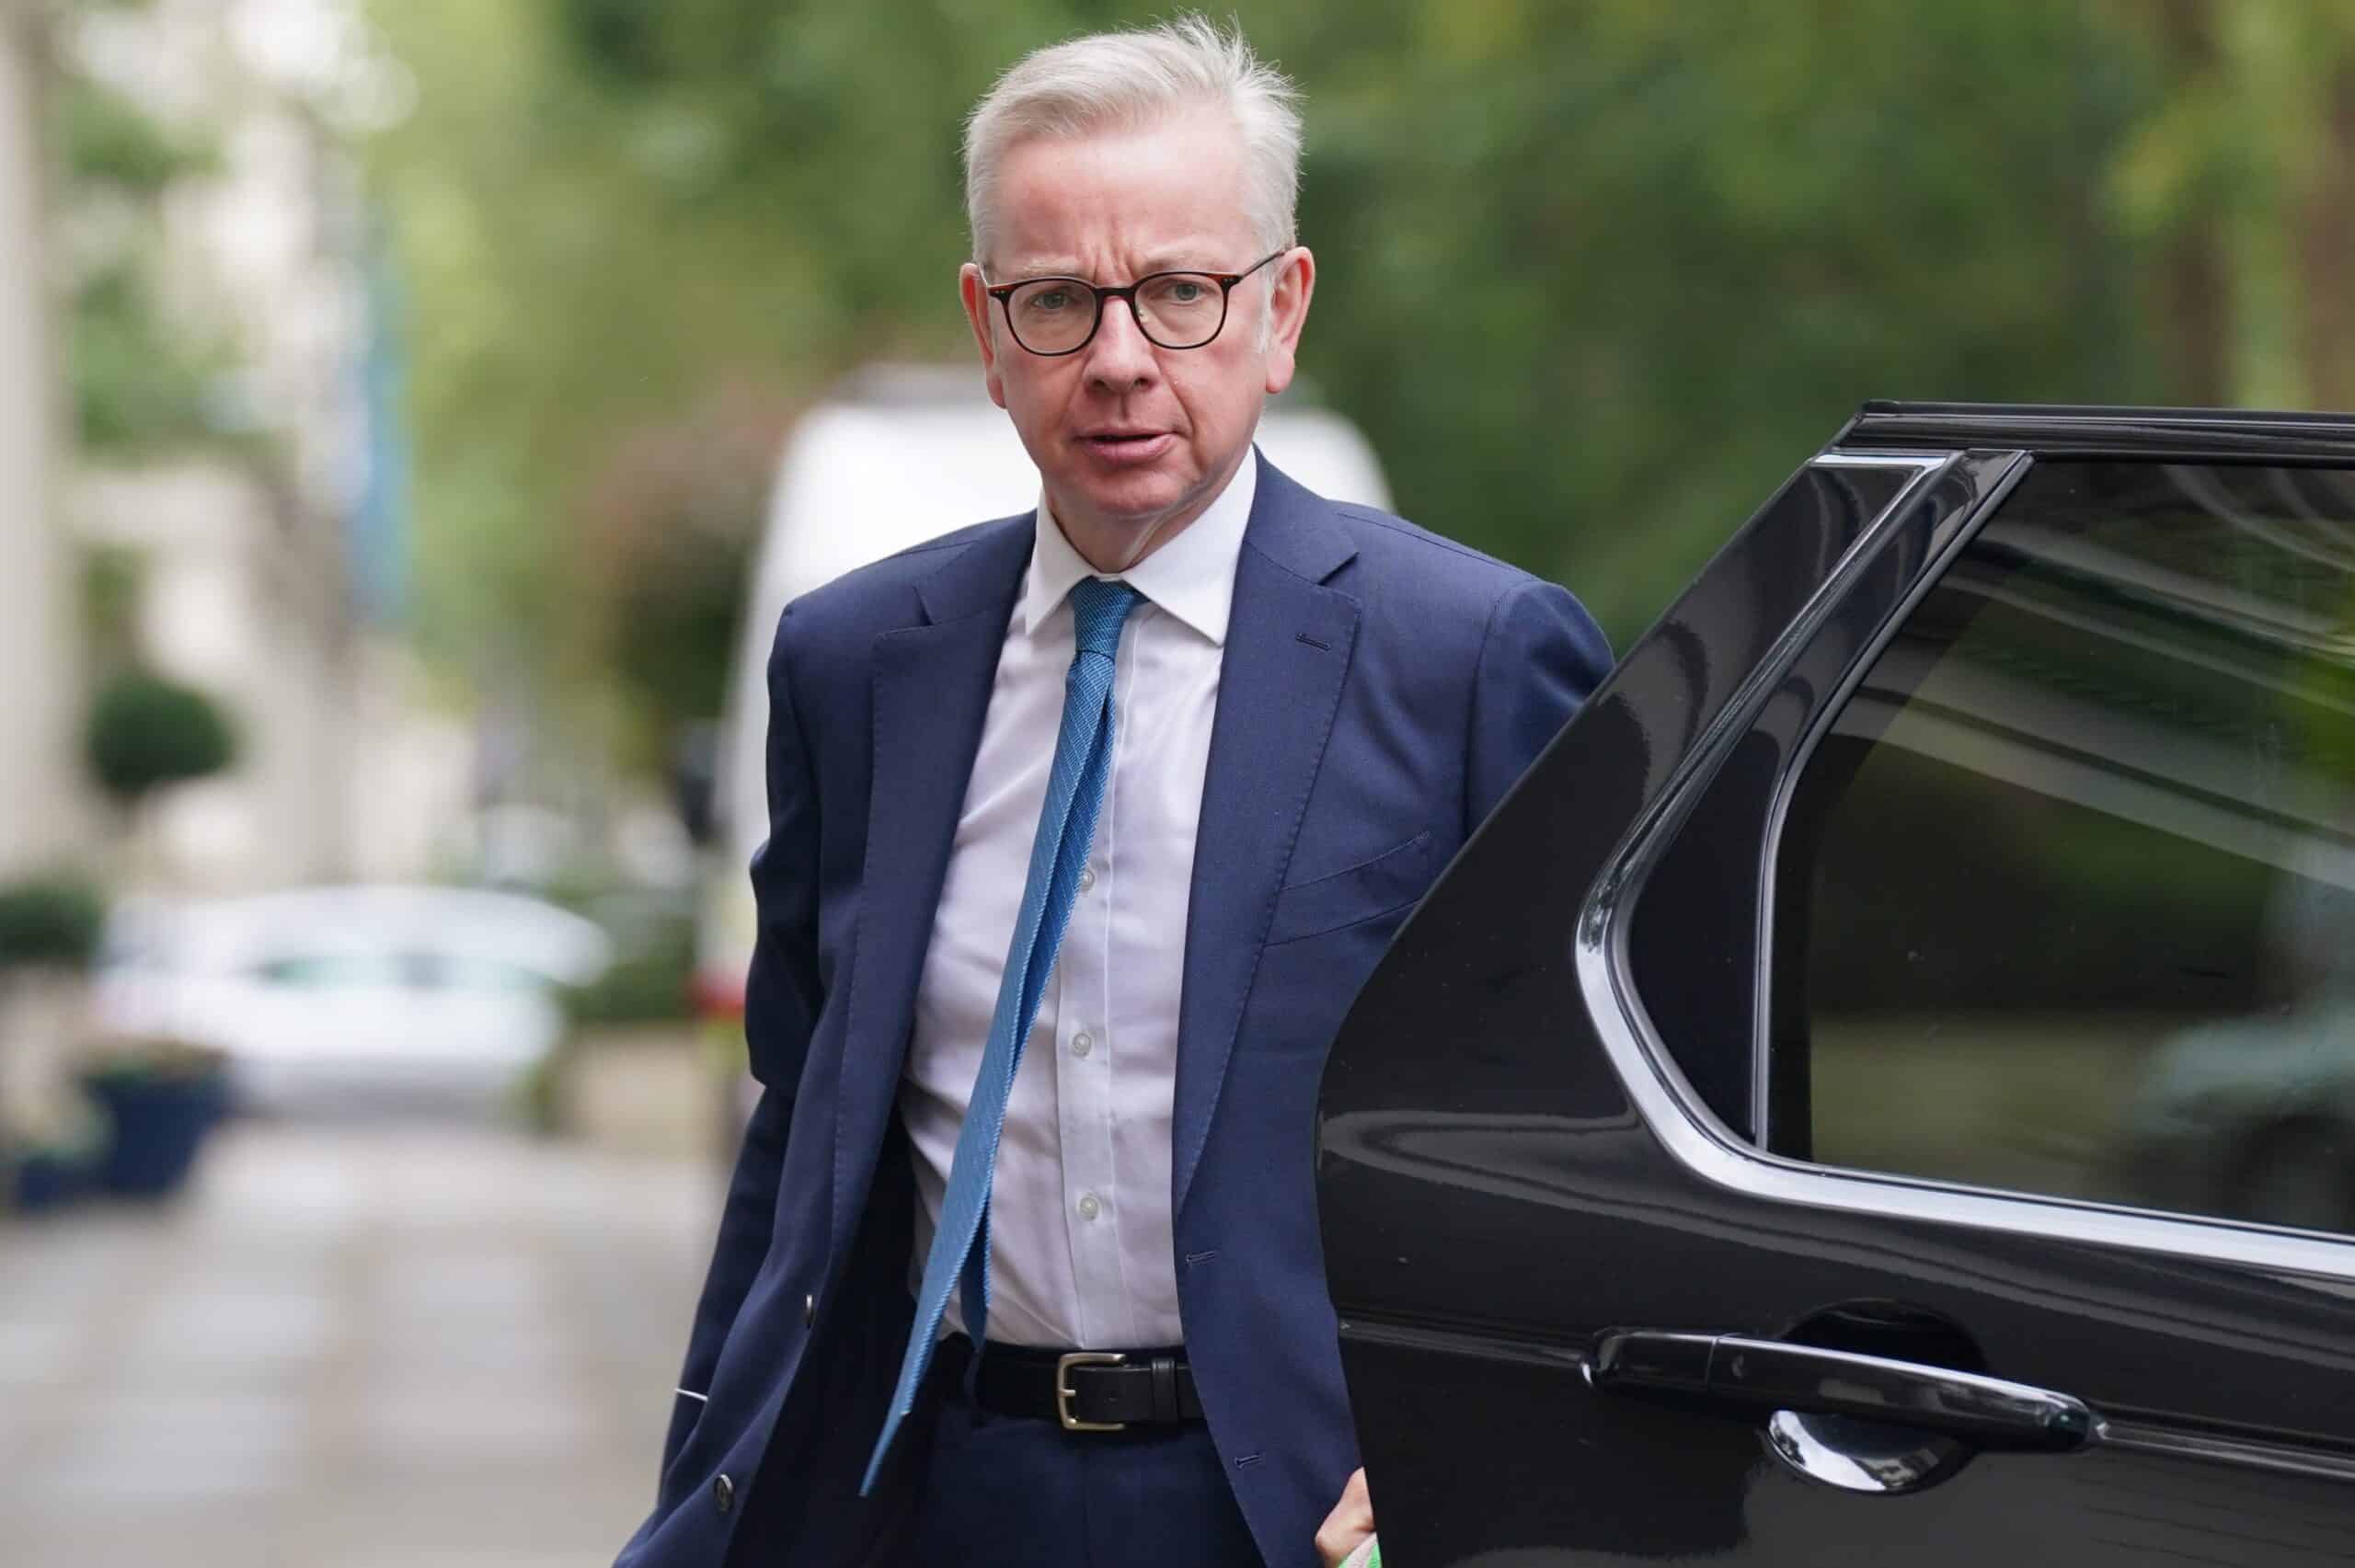 Concrete scandal: Michael Gove slammed for ‘ditching’ school rebuilding plans in 2010